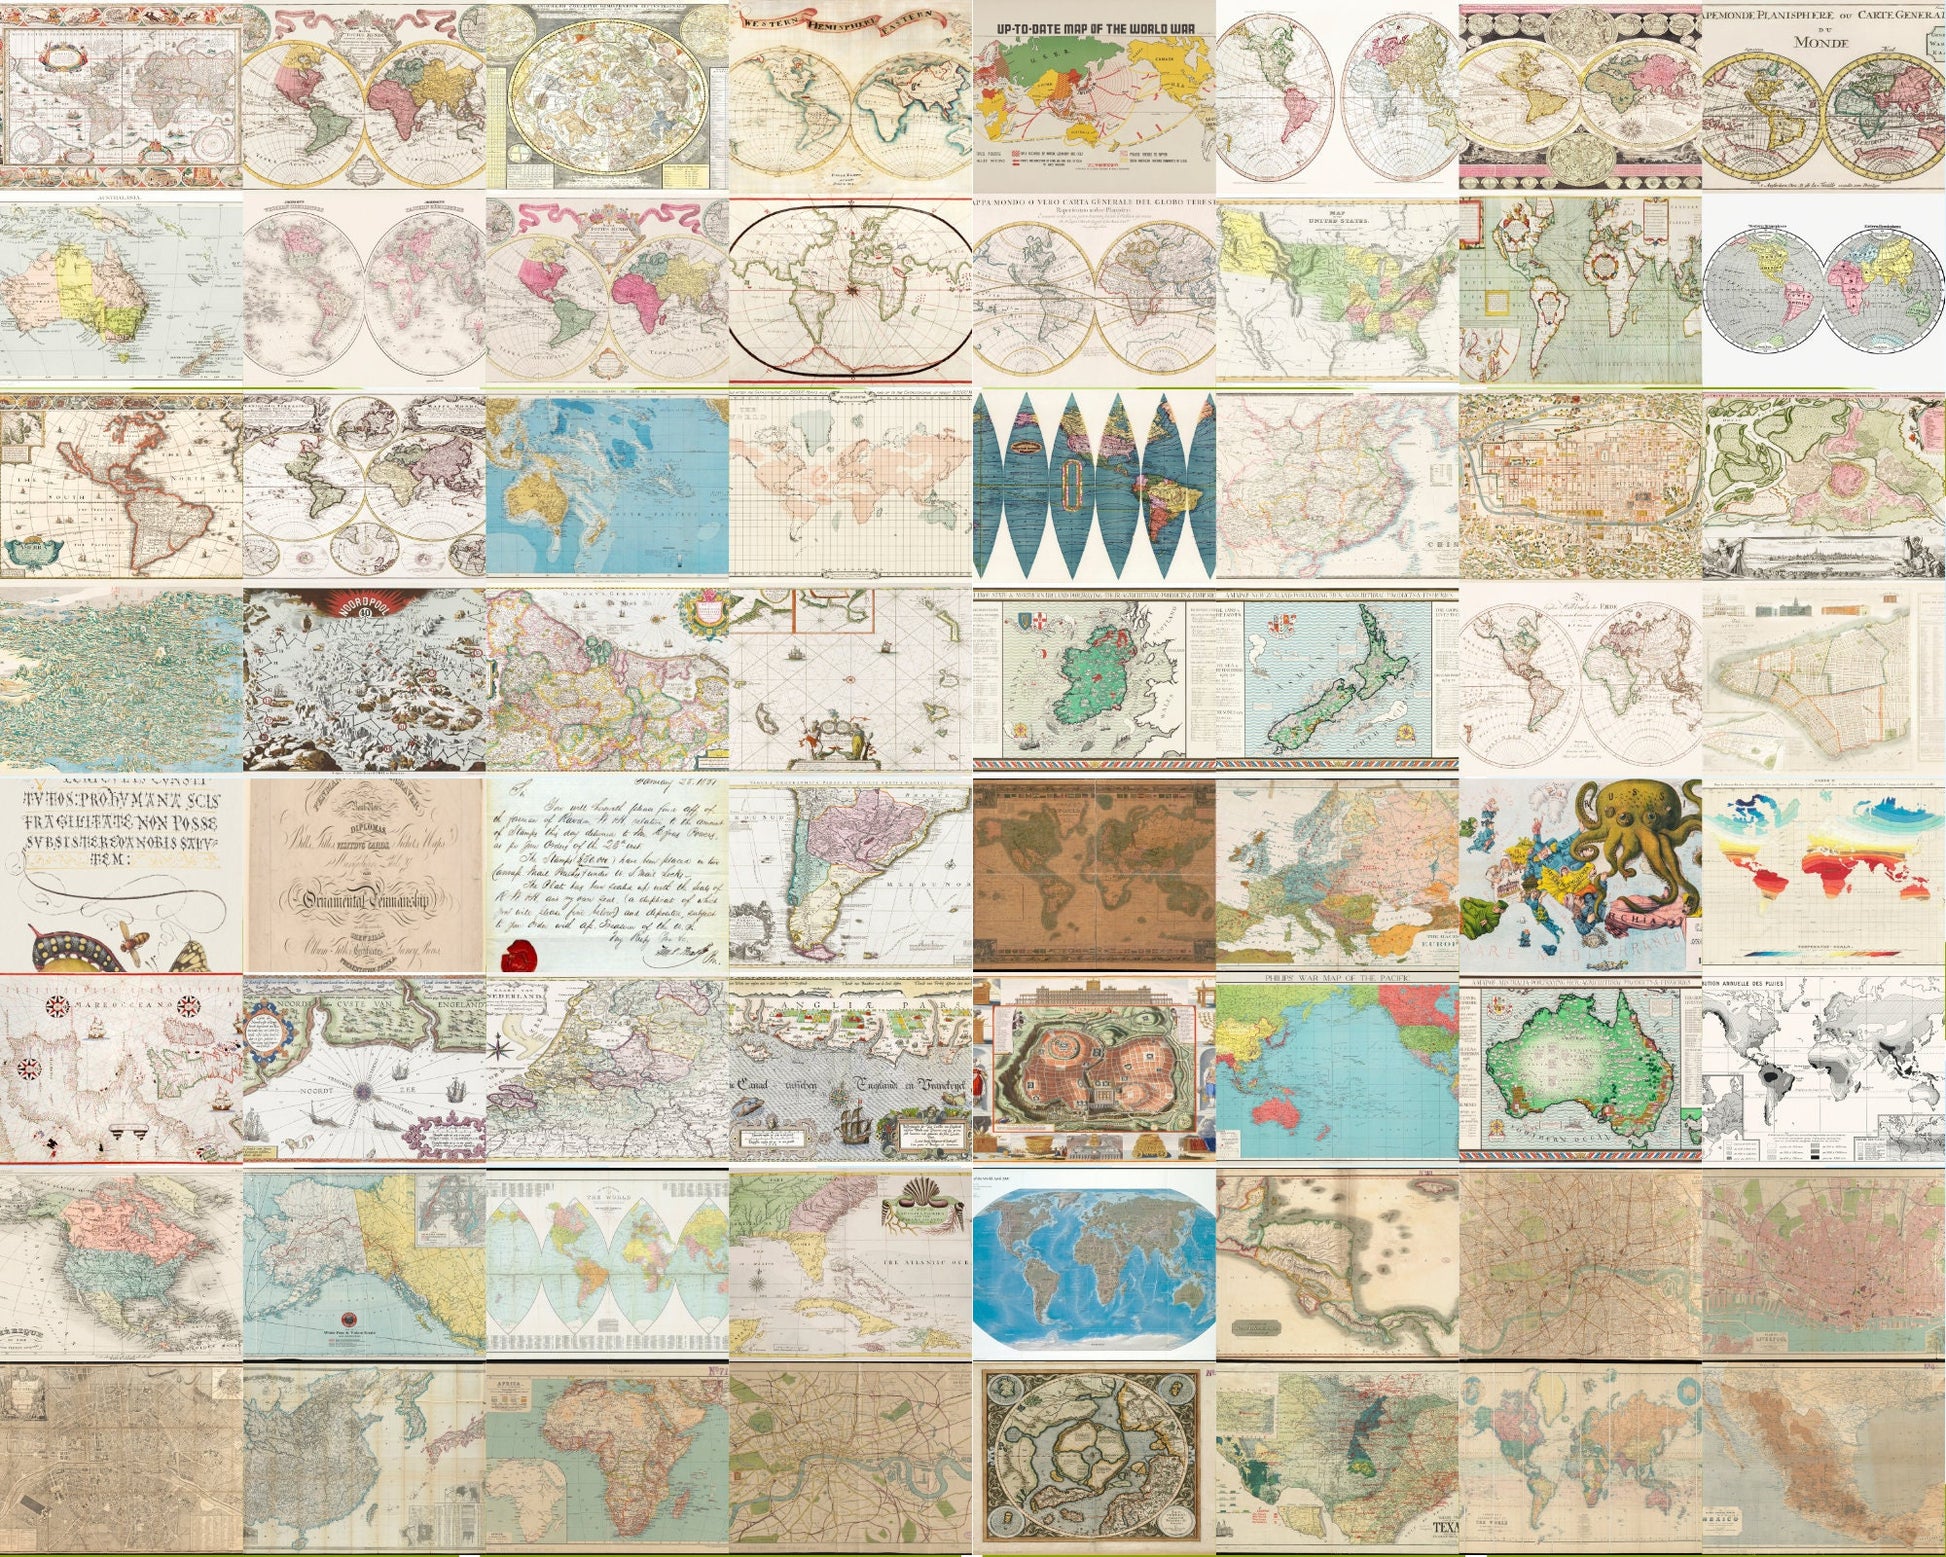 300 PCS Vintage Maps and Letters Wall Collage Kit INSTANT DOWNLOAD, map photo collage, photo letters, analog collage, retro world map print